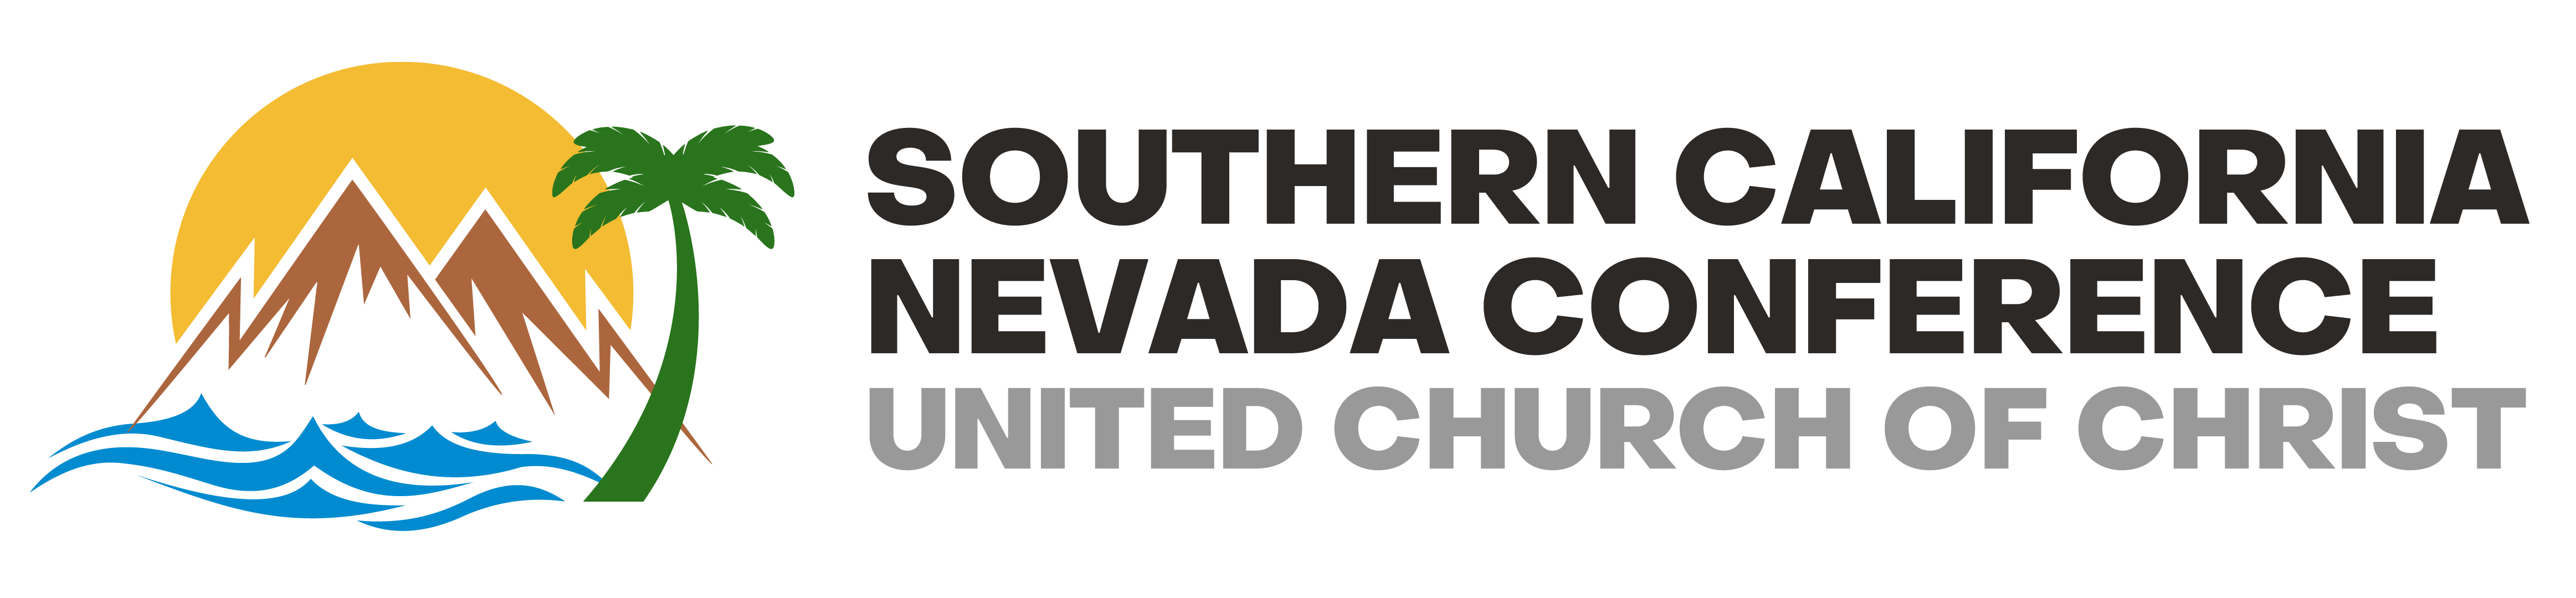 Logo of Southern California Nevada Conference, United Church of Christ